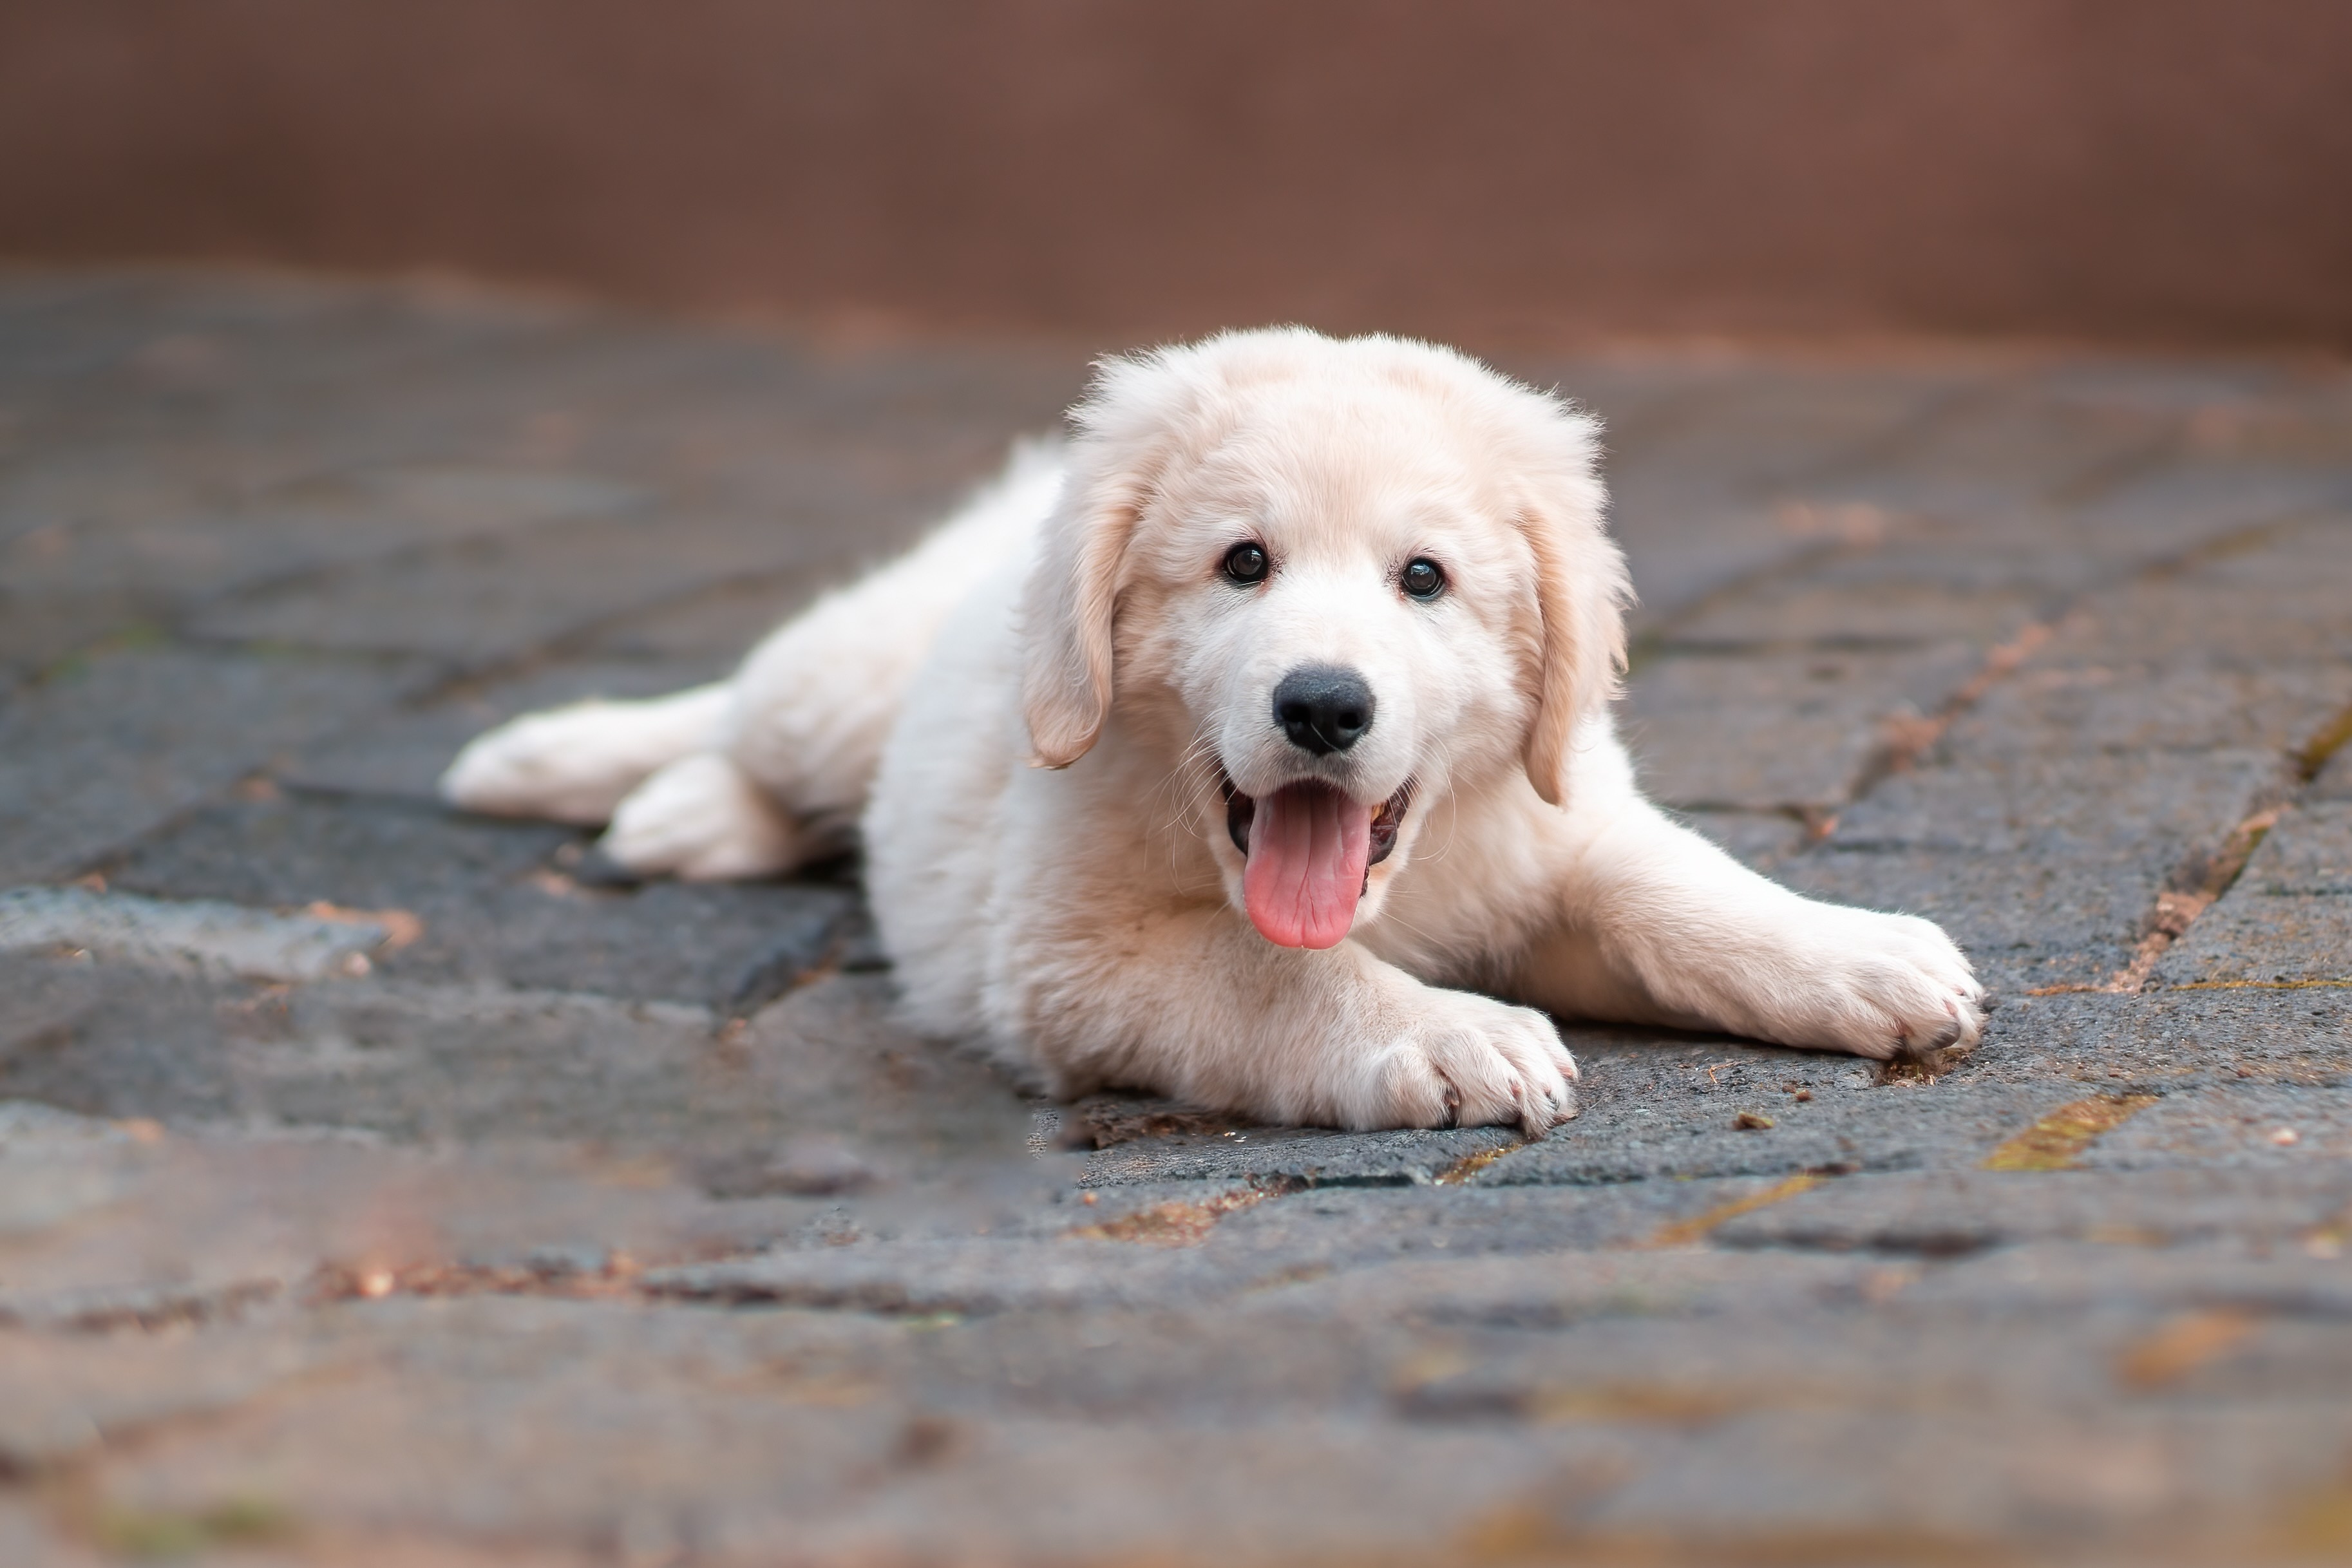 white kuvasz puppy lying down with his tongue out looking at the camera